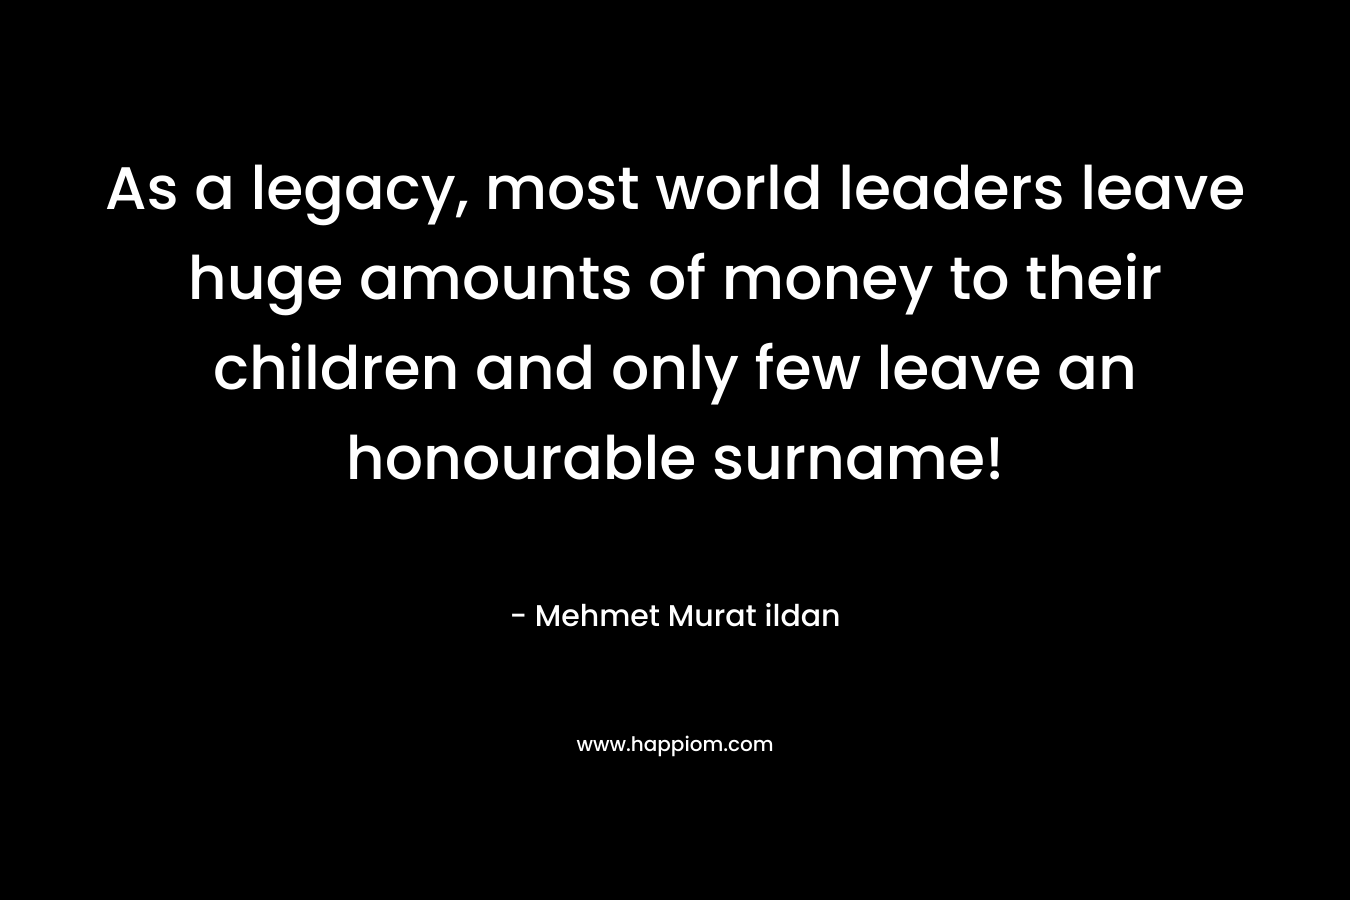 As a legacy, most world leaders leave huge amounts of money to their children and only few leave an honourable surname! – Mehmet Murat ildan